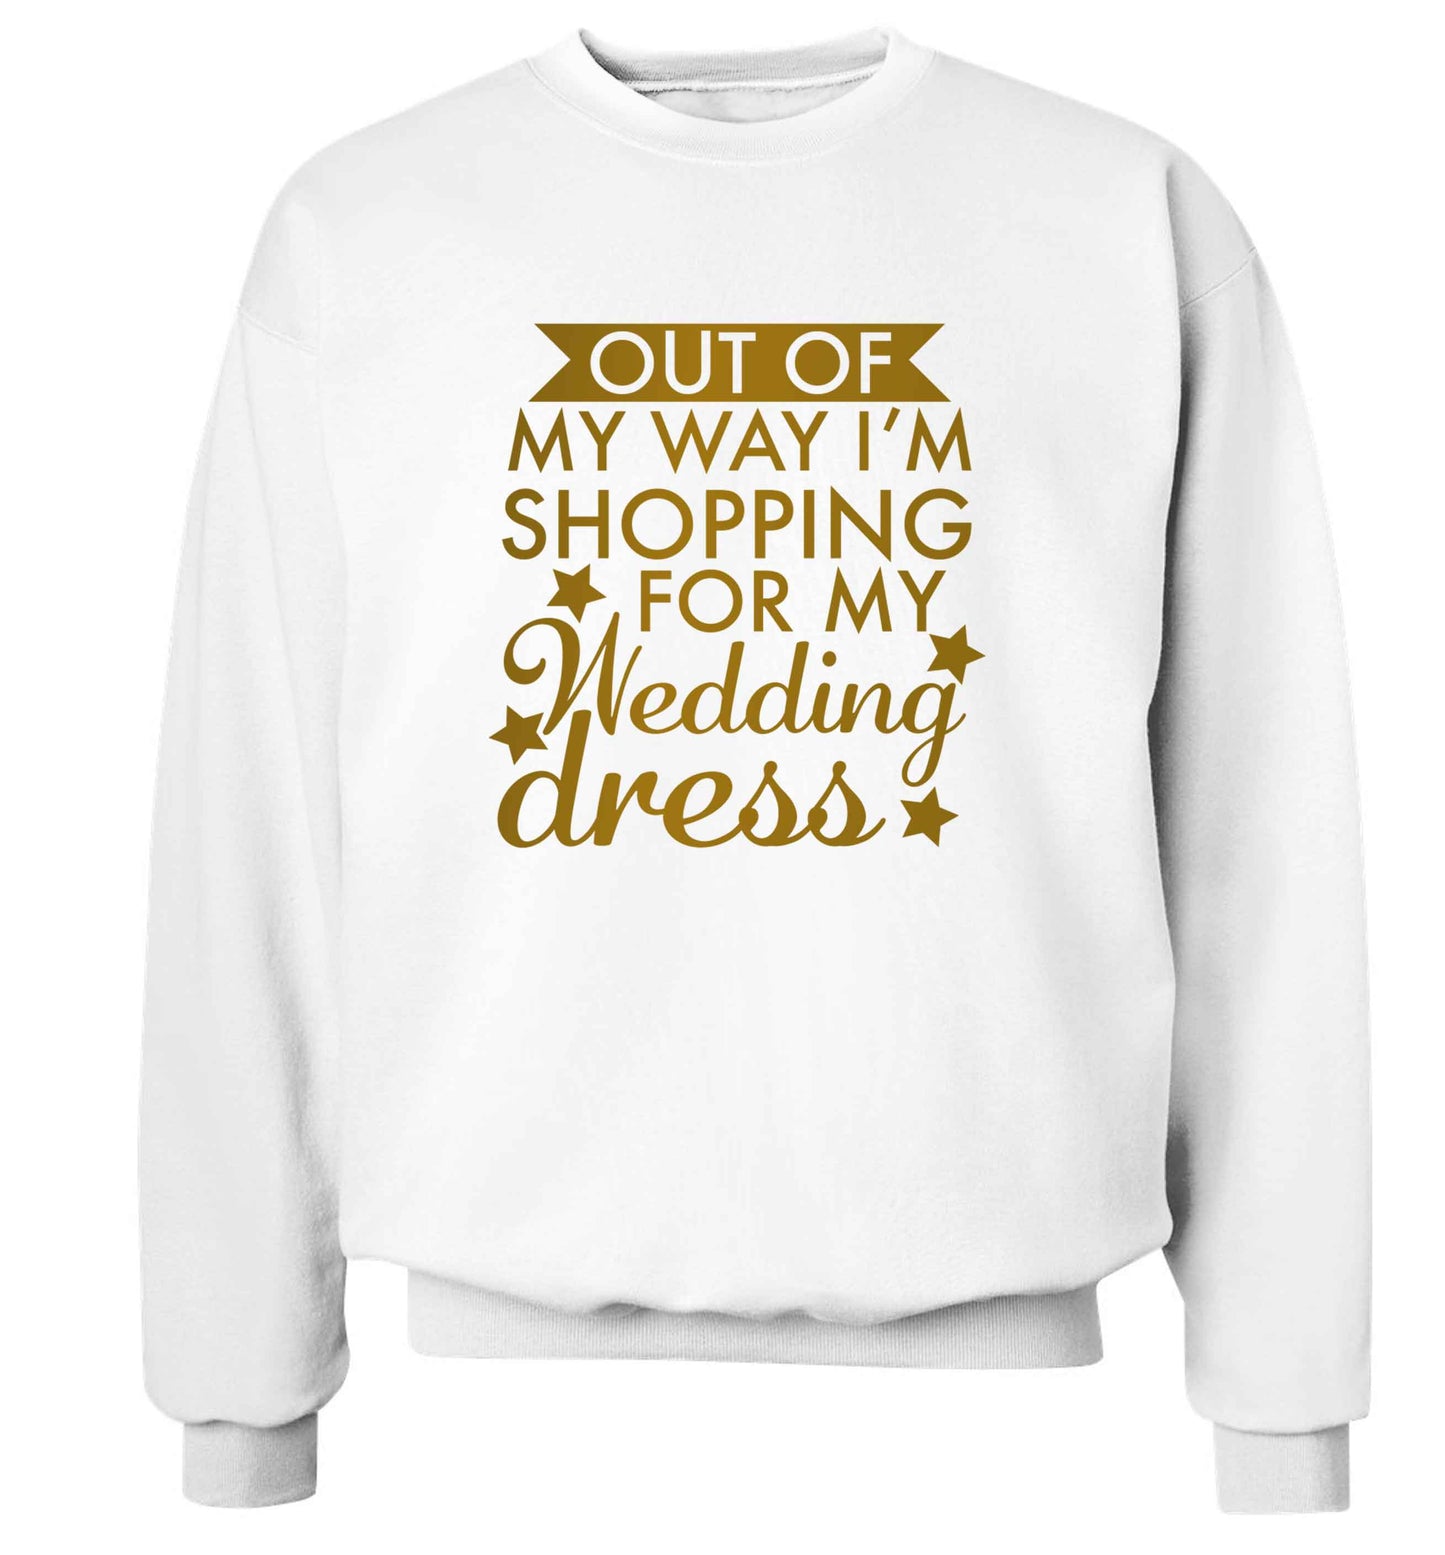 Out of my way I'm shopping for my wedding dress adult's unisex white sweater 2XL